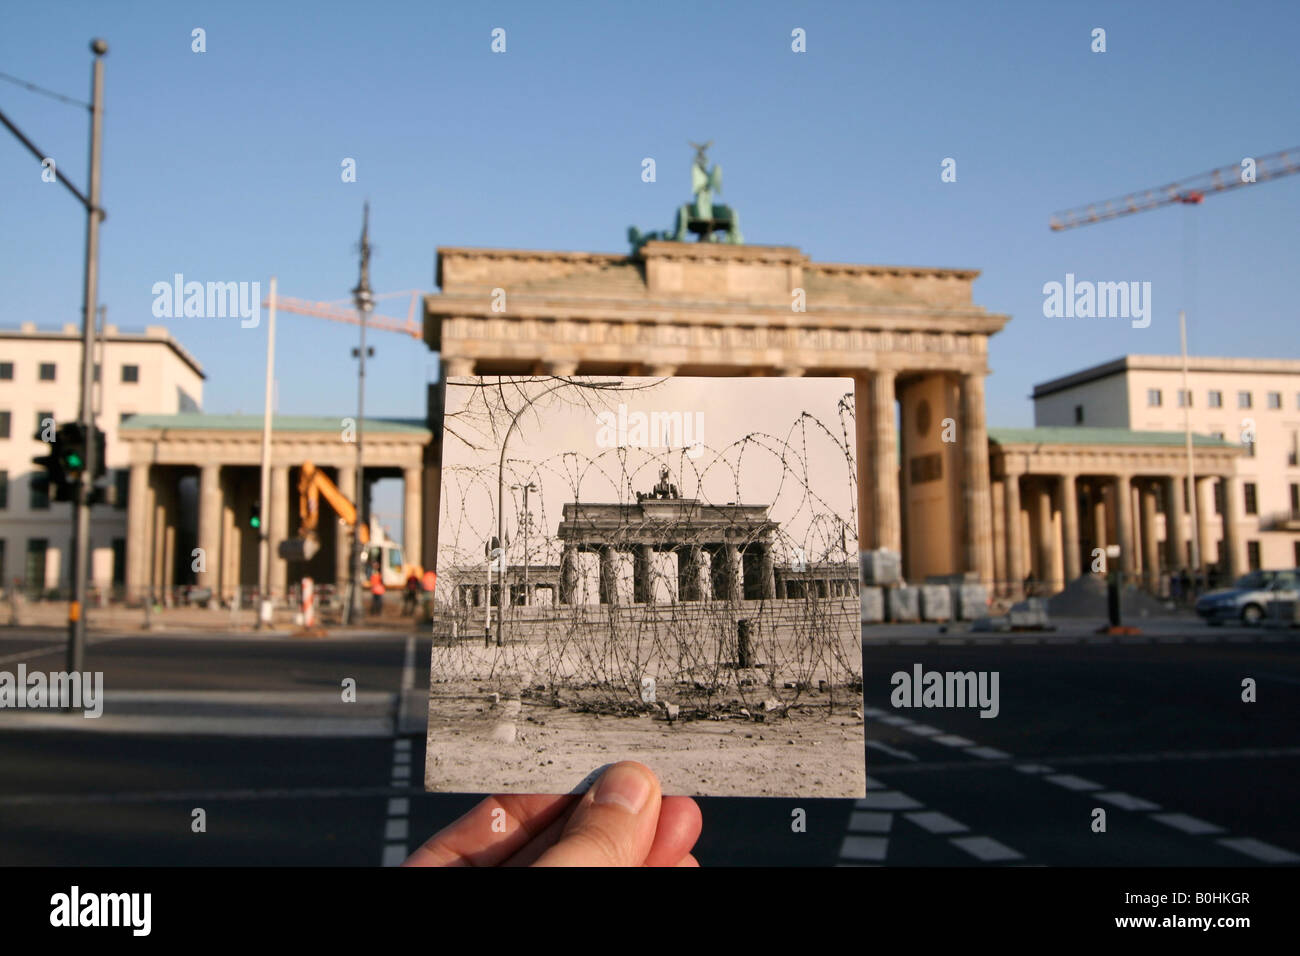 Then and now, hand holding an old black and white photo of Brandenburger Tor or Brandenburg Gate showing the Berlin Wall and ba Stock Photo